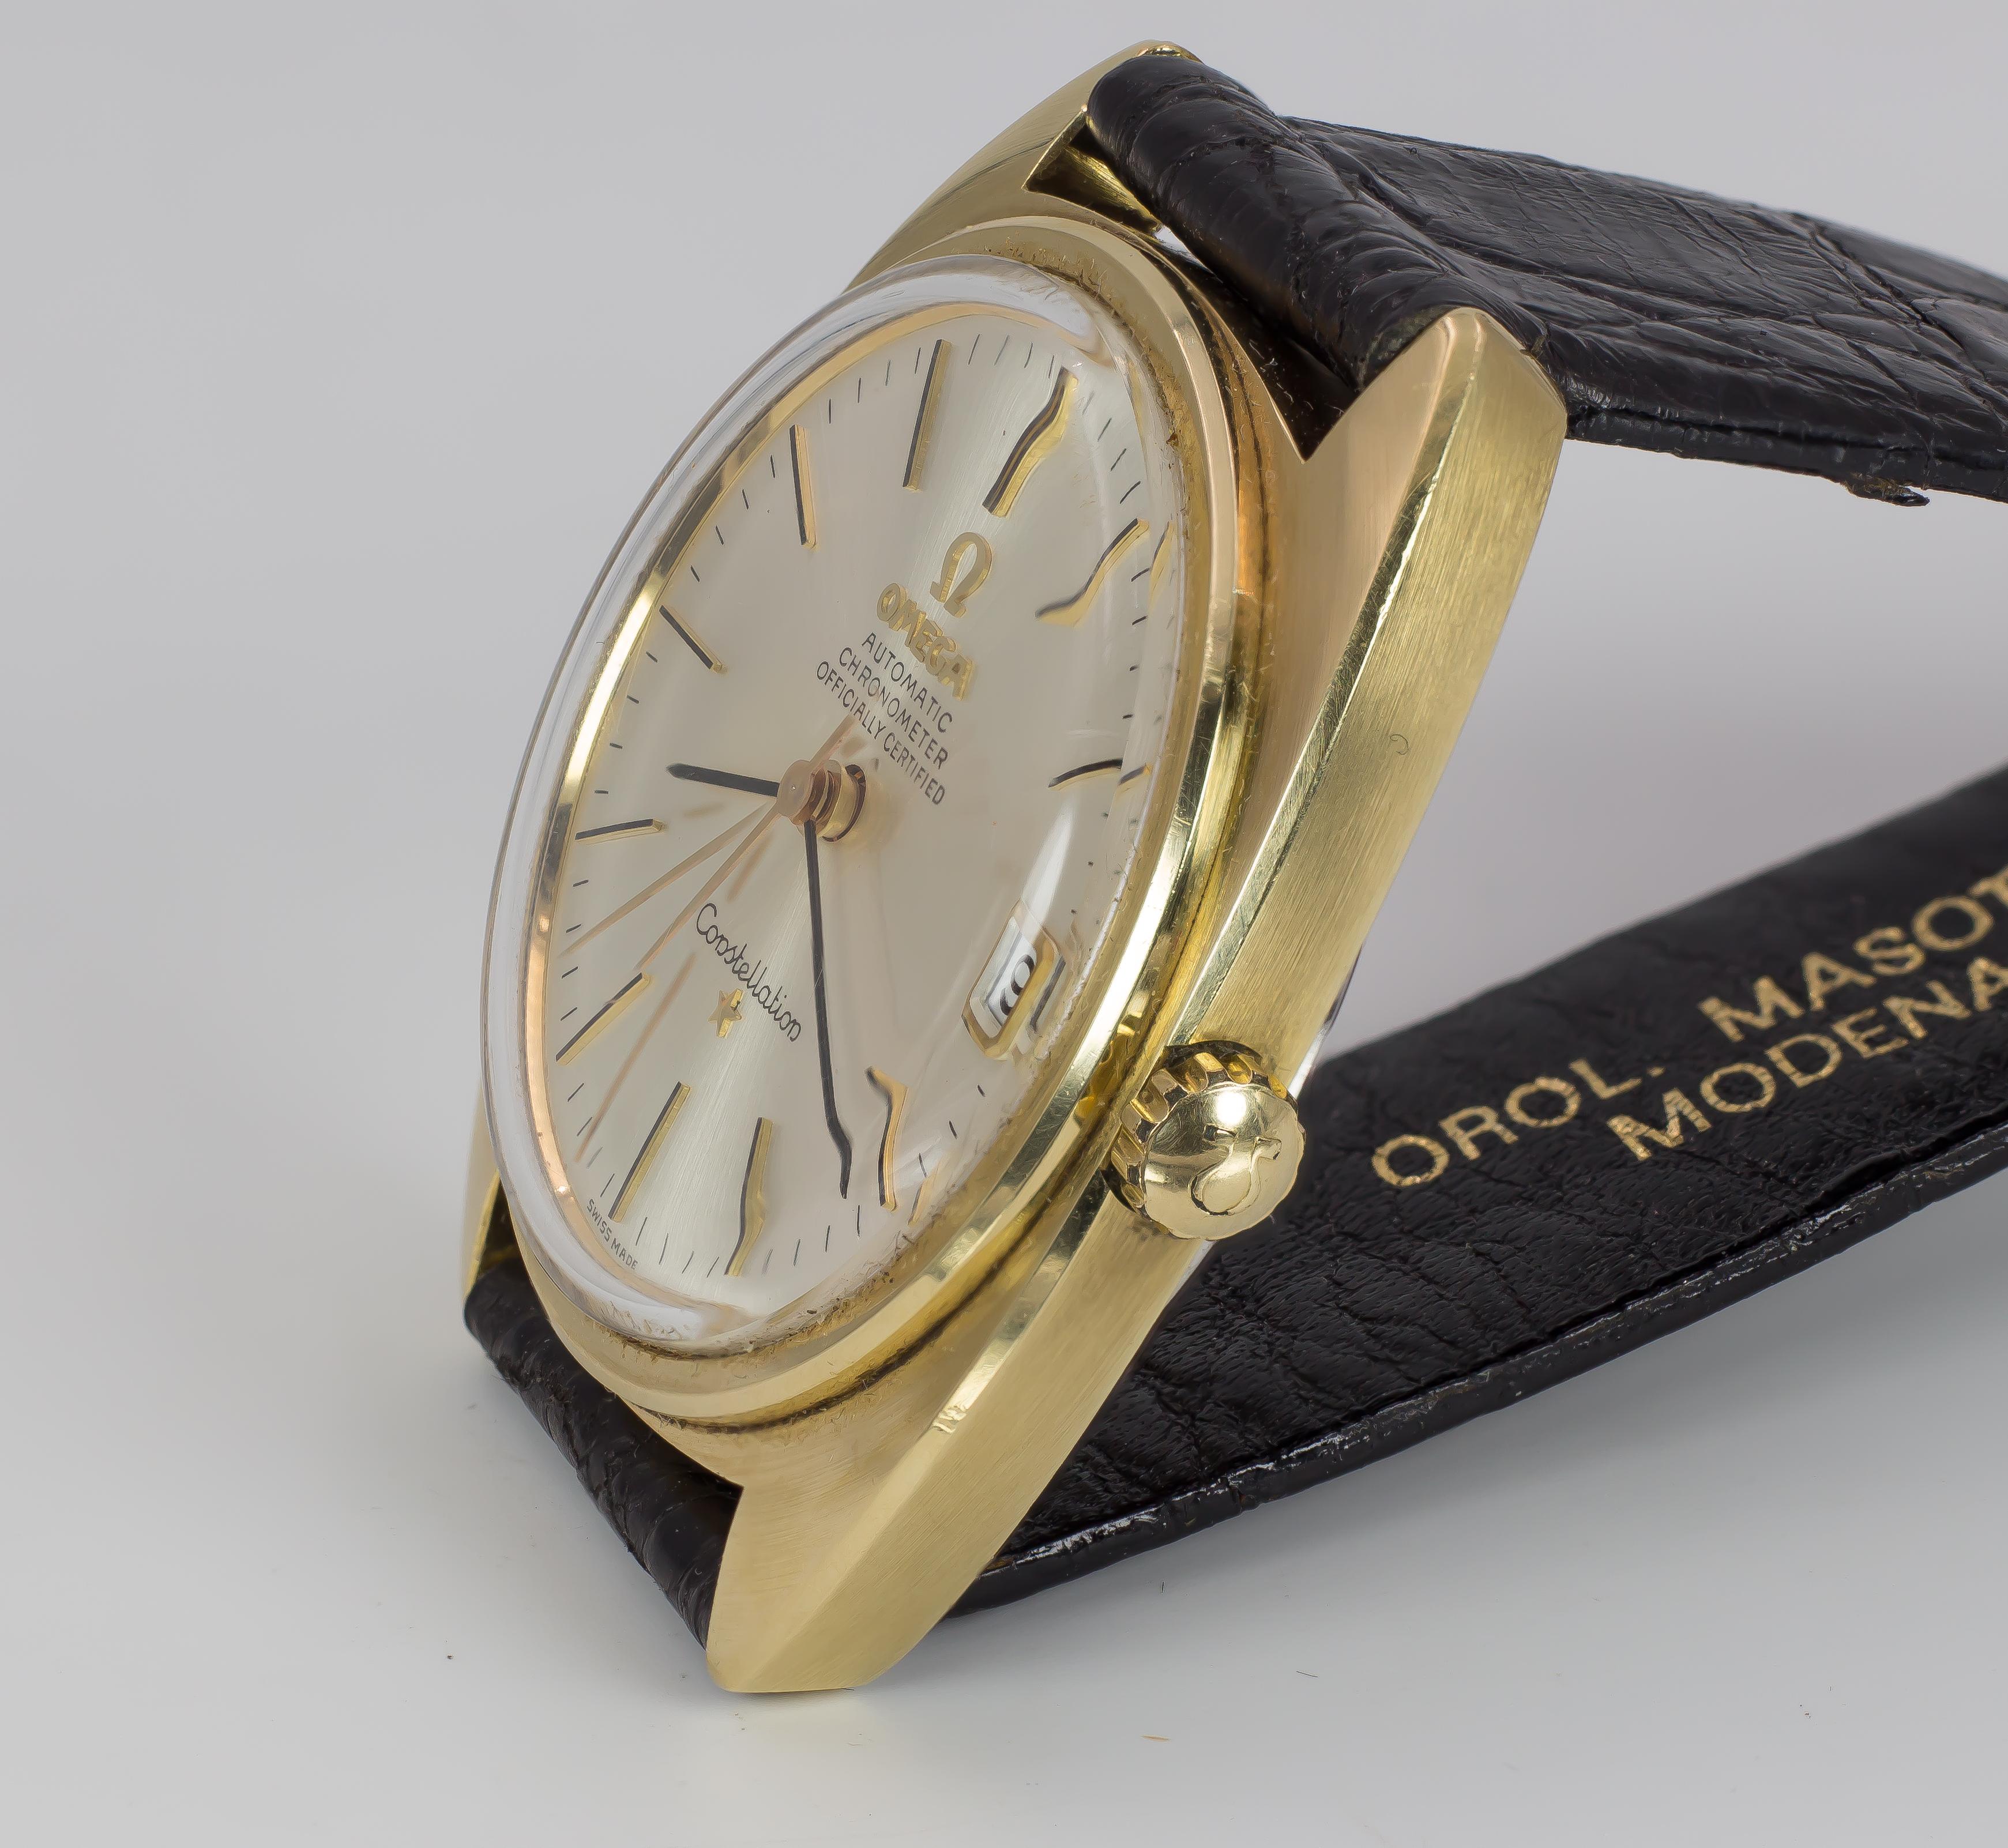 A Vintage Steel Constellation Omega Automatic Chronometer wrist watch, dating from 1960s and set with the calendar. 
The watch is well working.

BRAND
Omega (product line: Constellation)

MATERIALS
Gold and steel

MEASUREMENTS
Diameter: 35 mm